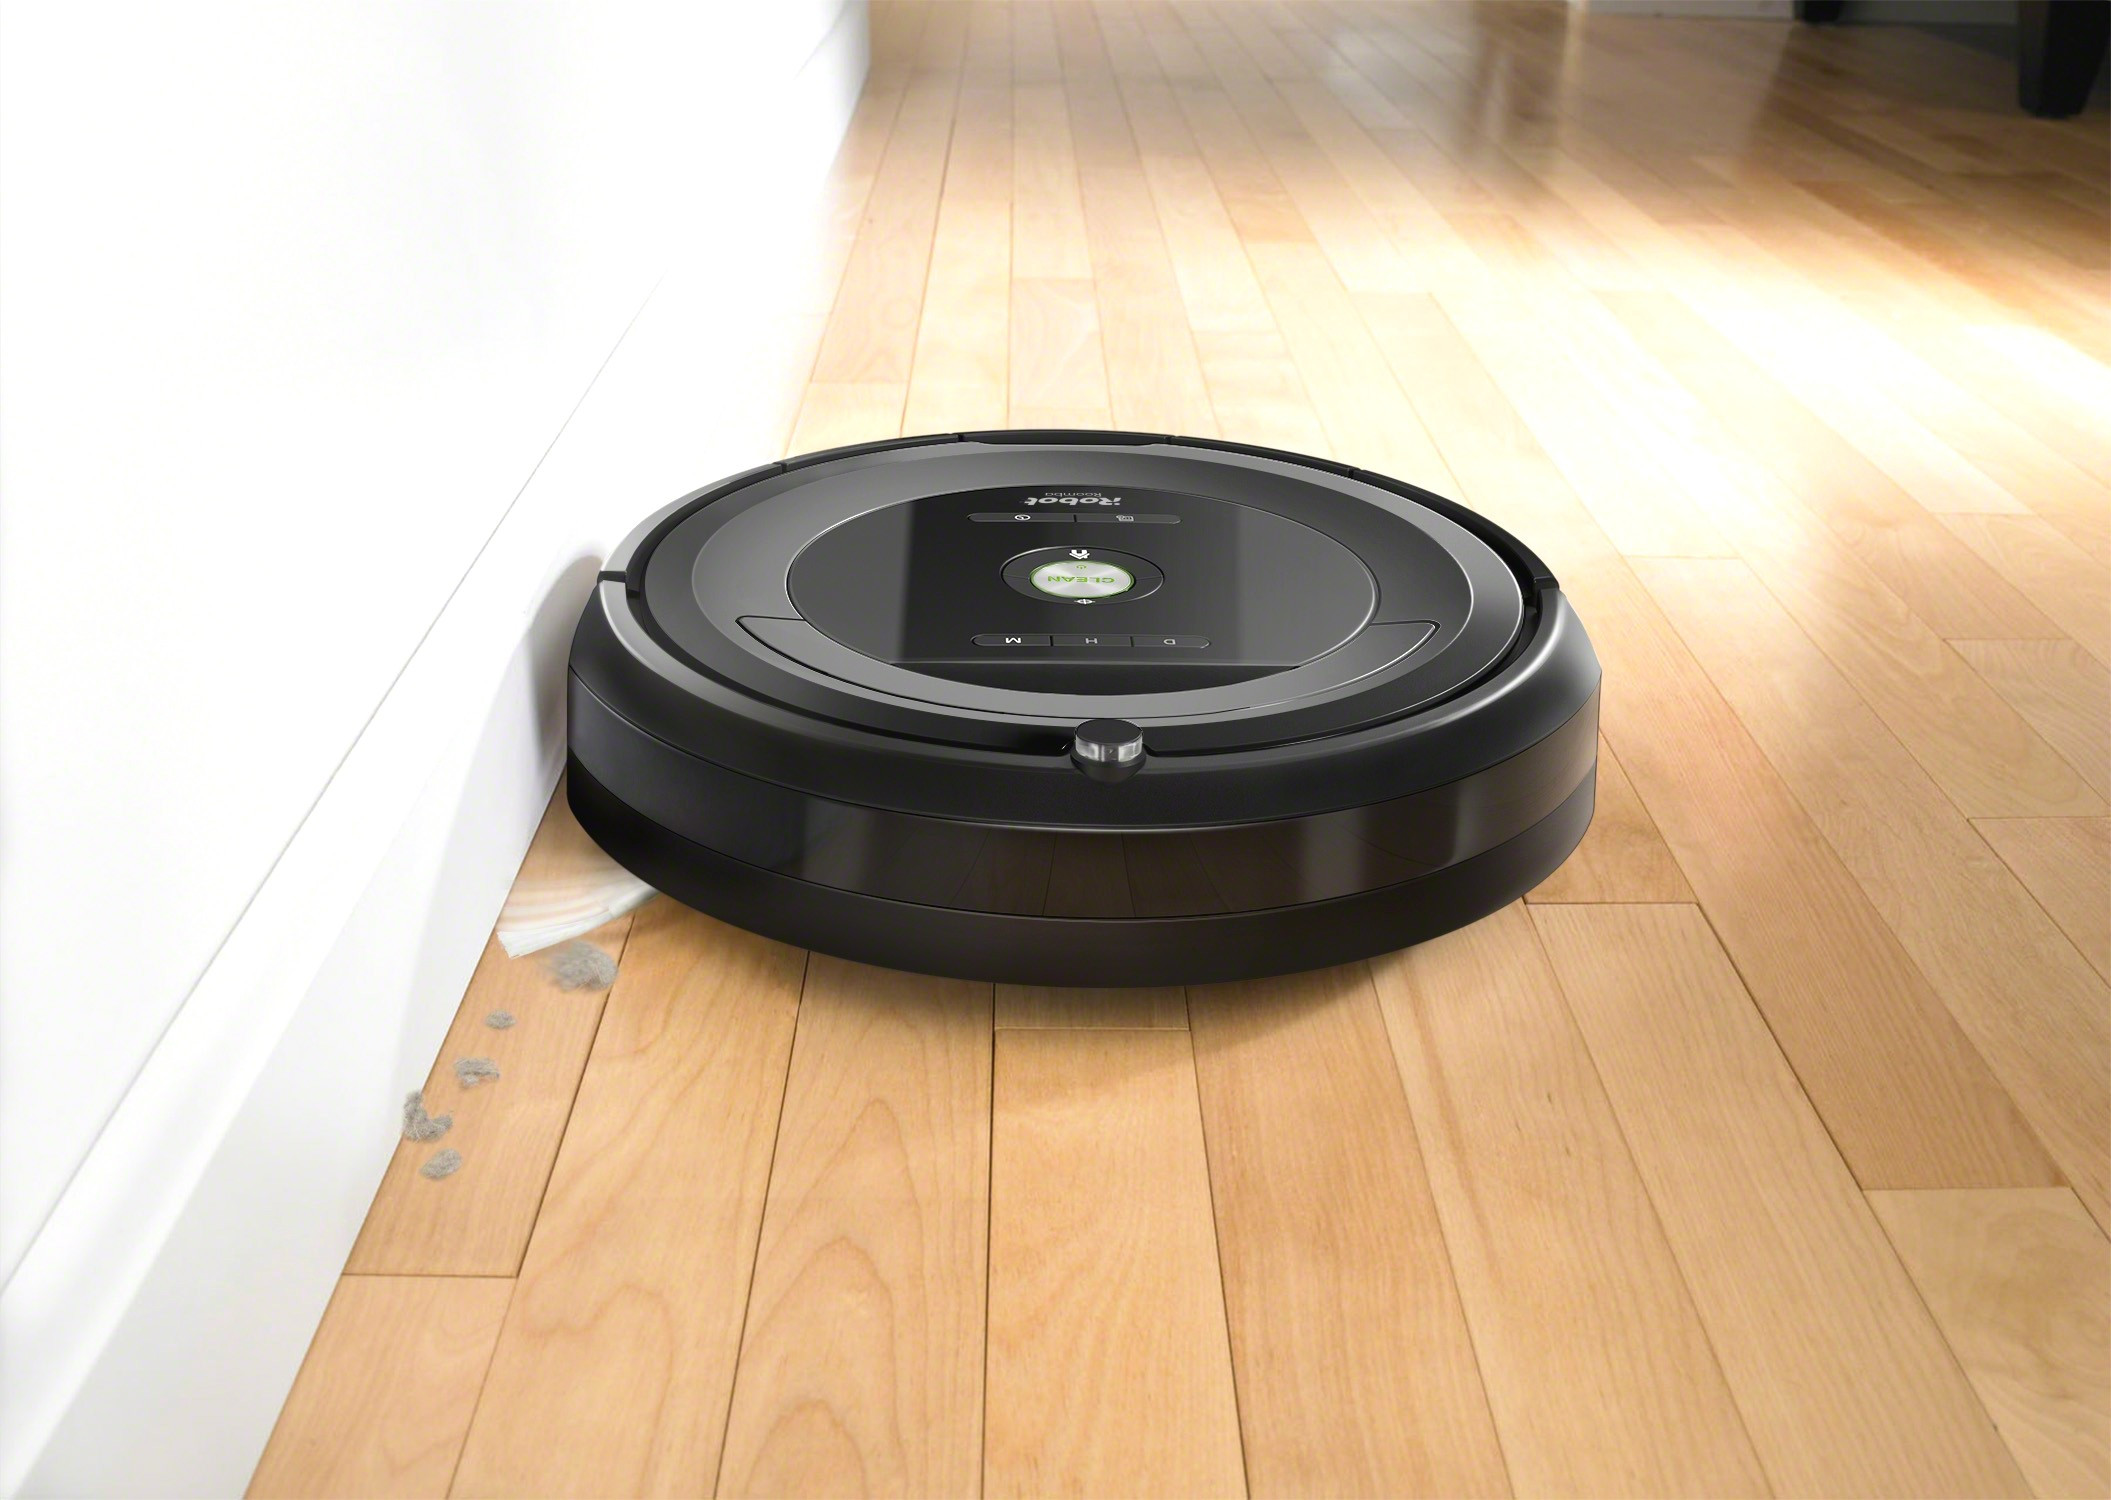 25 Elegant Automatic Vacuum for Hardwood Floors 2024 free download automatic vacuum for hardwood floors of buy irobot roomba 680 robotic vacuum cleaner grey at mailshop co in roomba by irobot 680 robot vacuum with manufacturer s warranty avec 33b3d85d bfae 